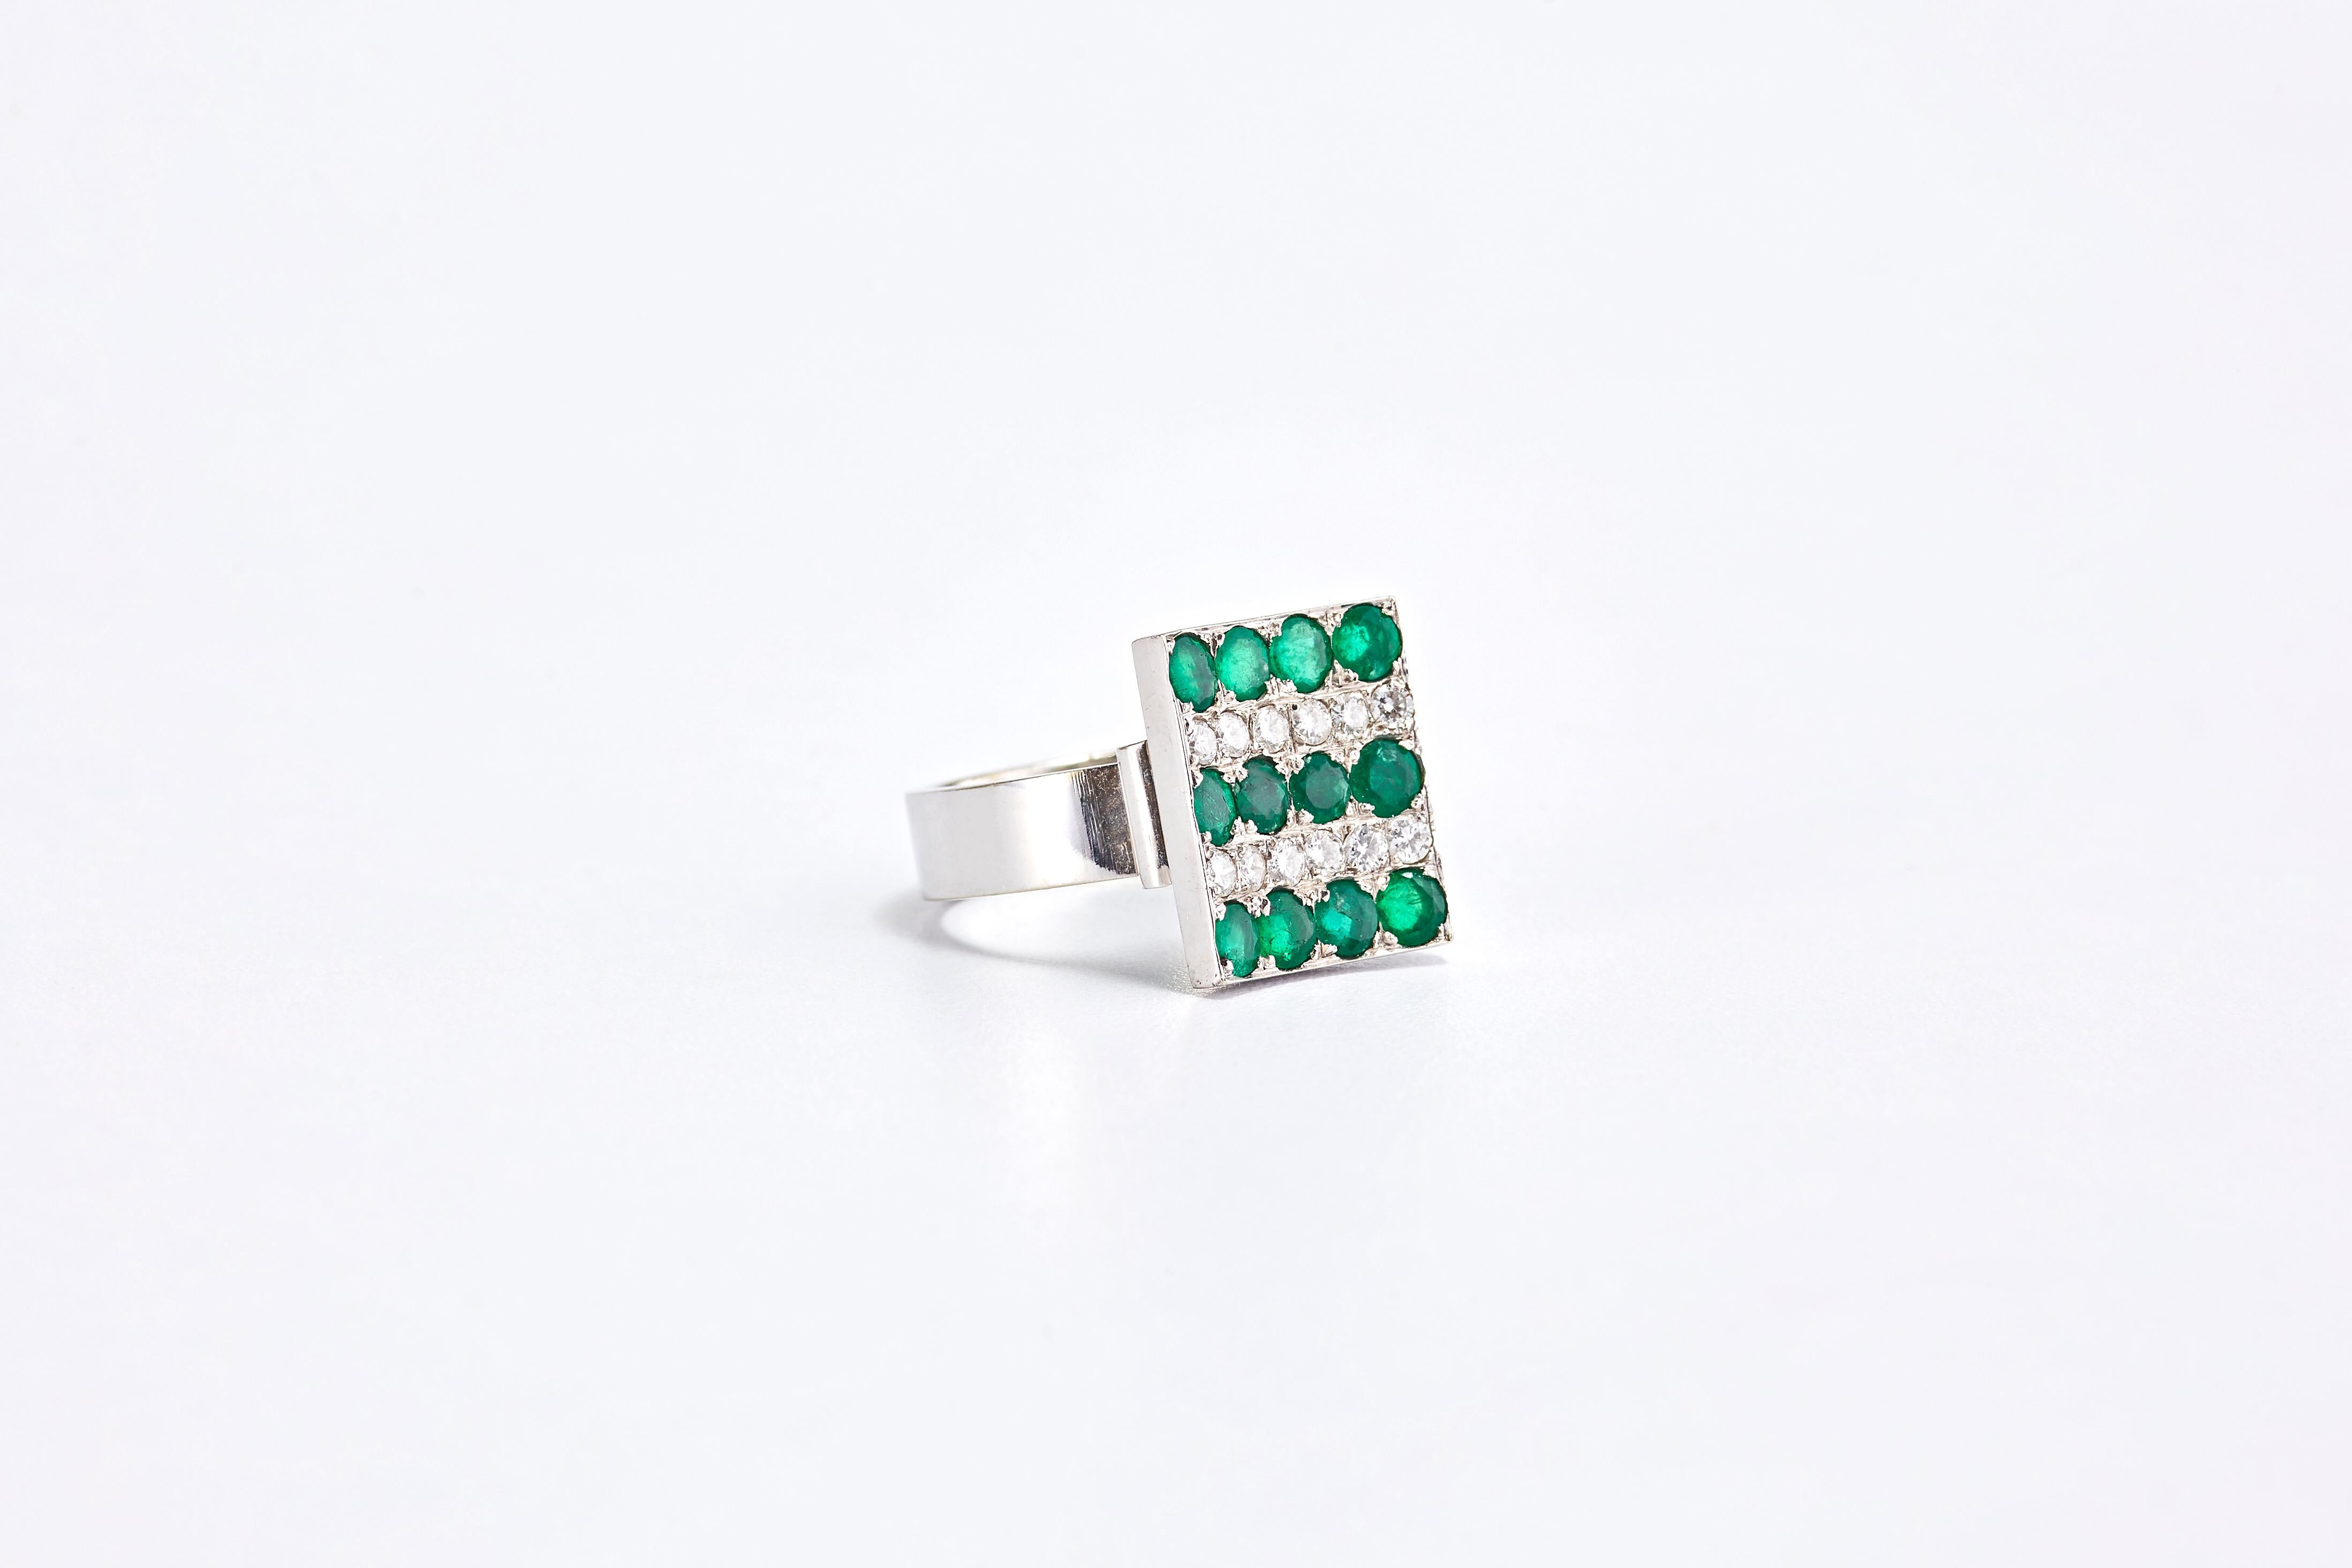 14 Karat White Gold Ring with Emerald Stones and Diamonds

Elegant white gold ring with 5 rows of stones. 2 rows of diamonds and 3 rows of round cut emeralds.
Emerald stones 1.80 ct. Diamonds 0.96 ct.
Total weight: 8.45 grams. Size: 7.5 US but